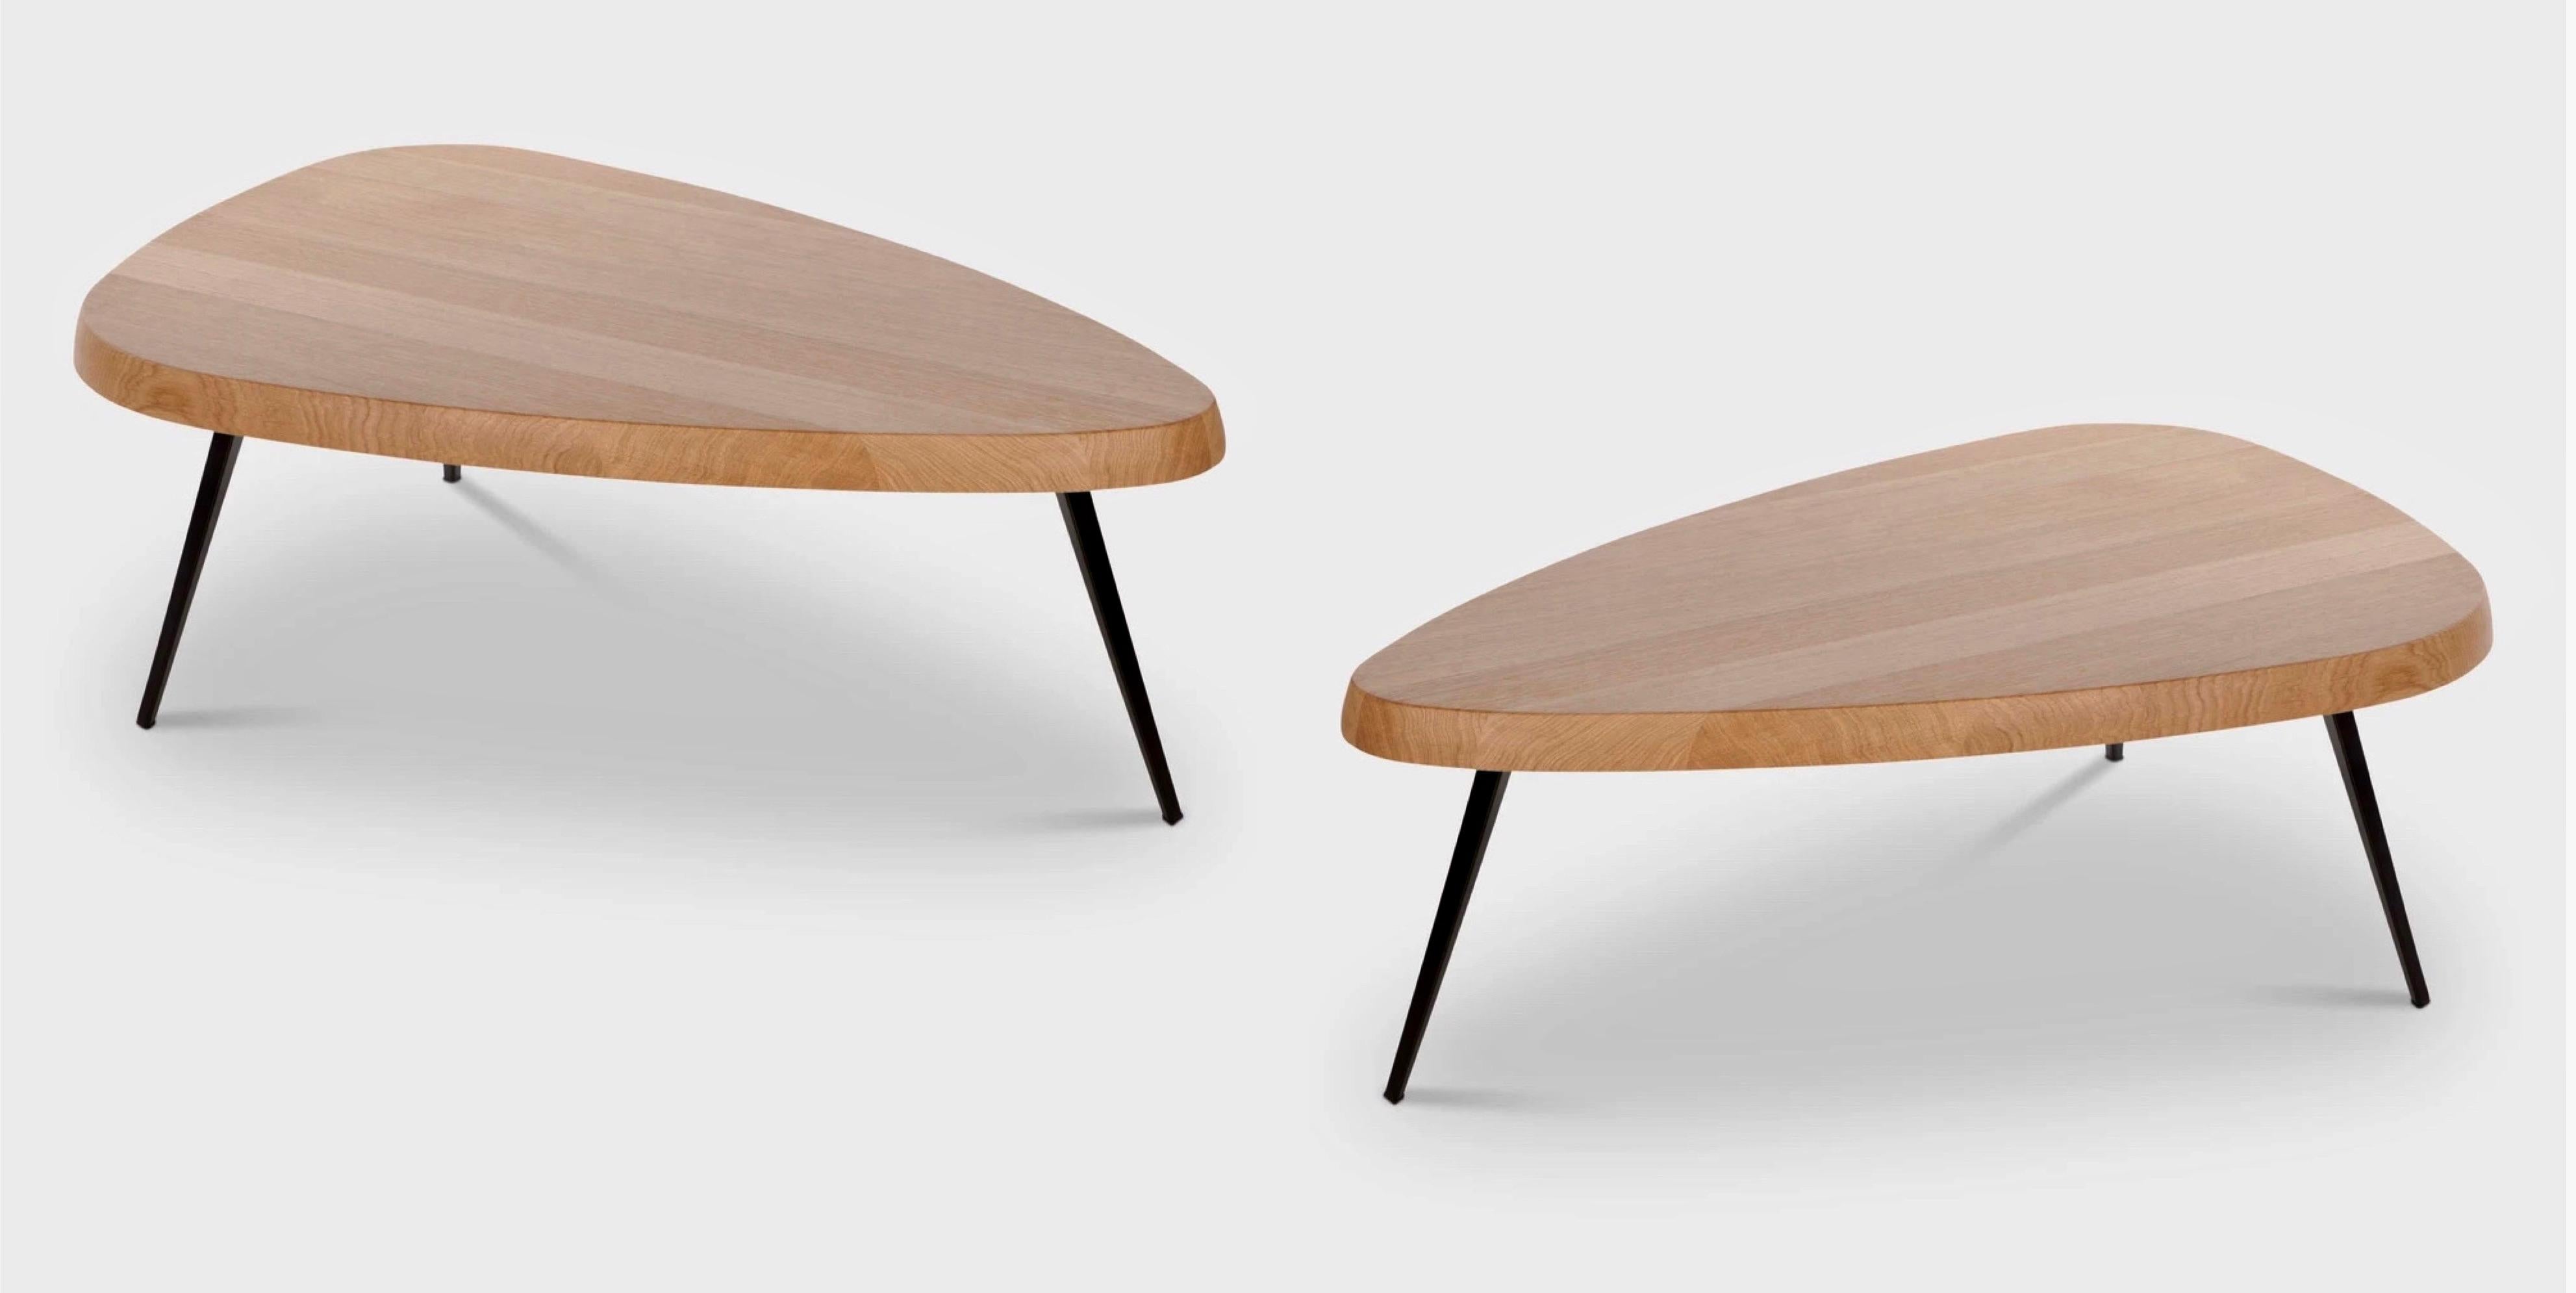 French architect and designer Charlotte Perriand's pair of Mexique Oak Low Tables were made in 2018 by Cassina. Part of their Maestri Collection, these tables were originally designed in 1952 for the Maison du Mexique at the Cité Universitaire